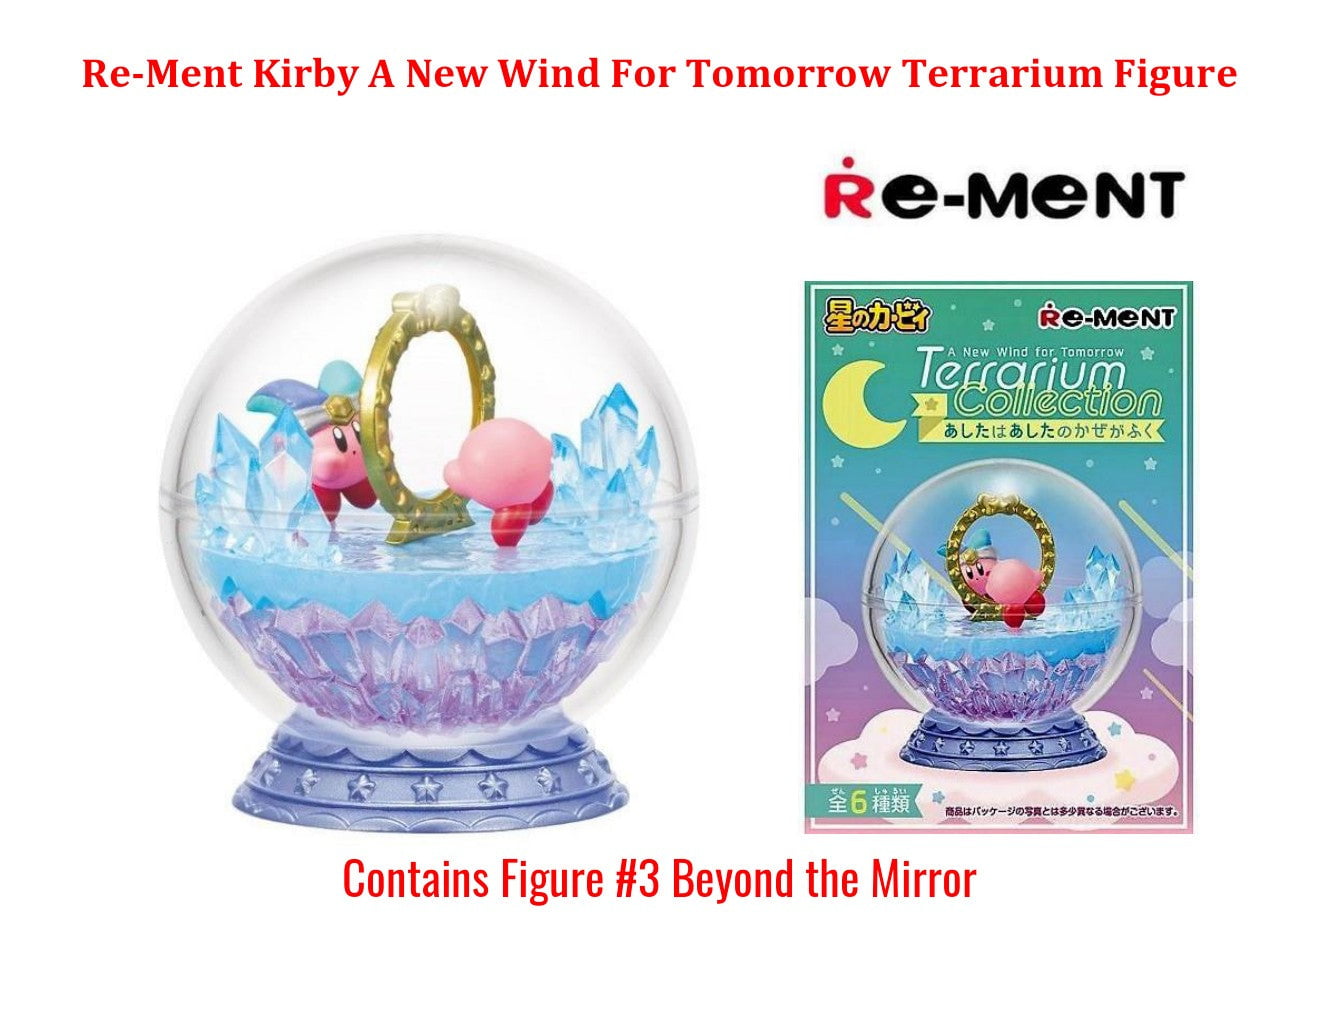 Re-Ment Kirby's Adventure Terrarium Collection Super DX Dream for Tomorrow JP 